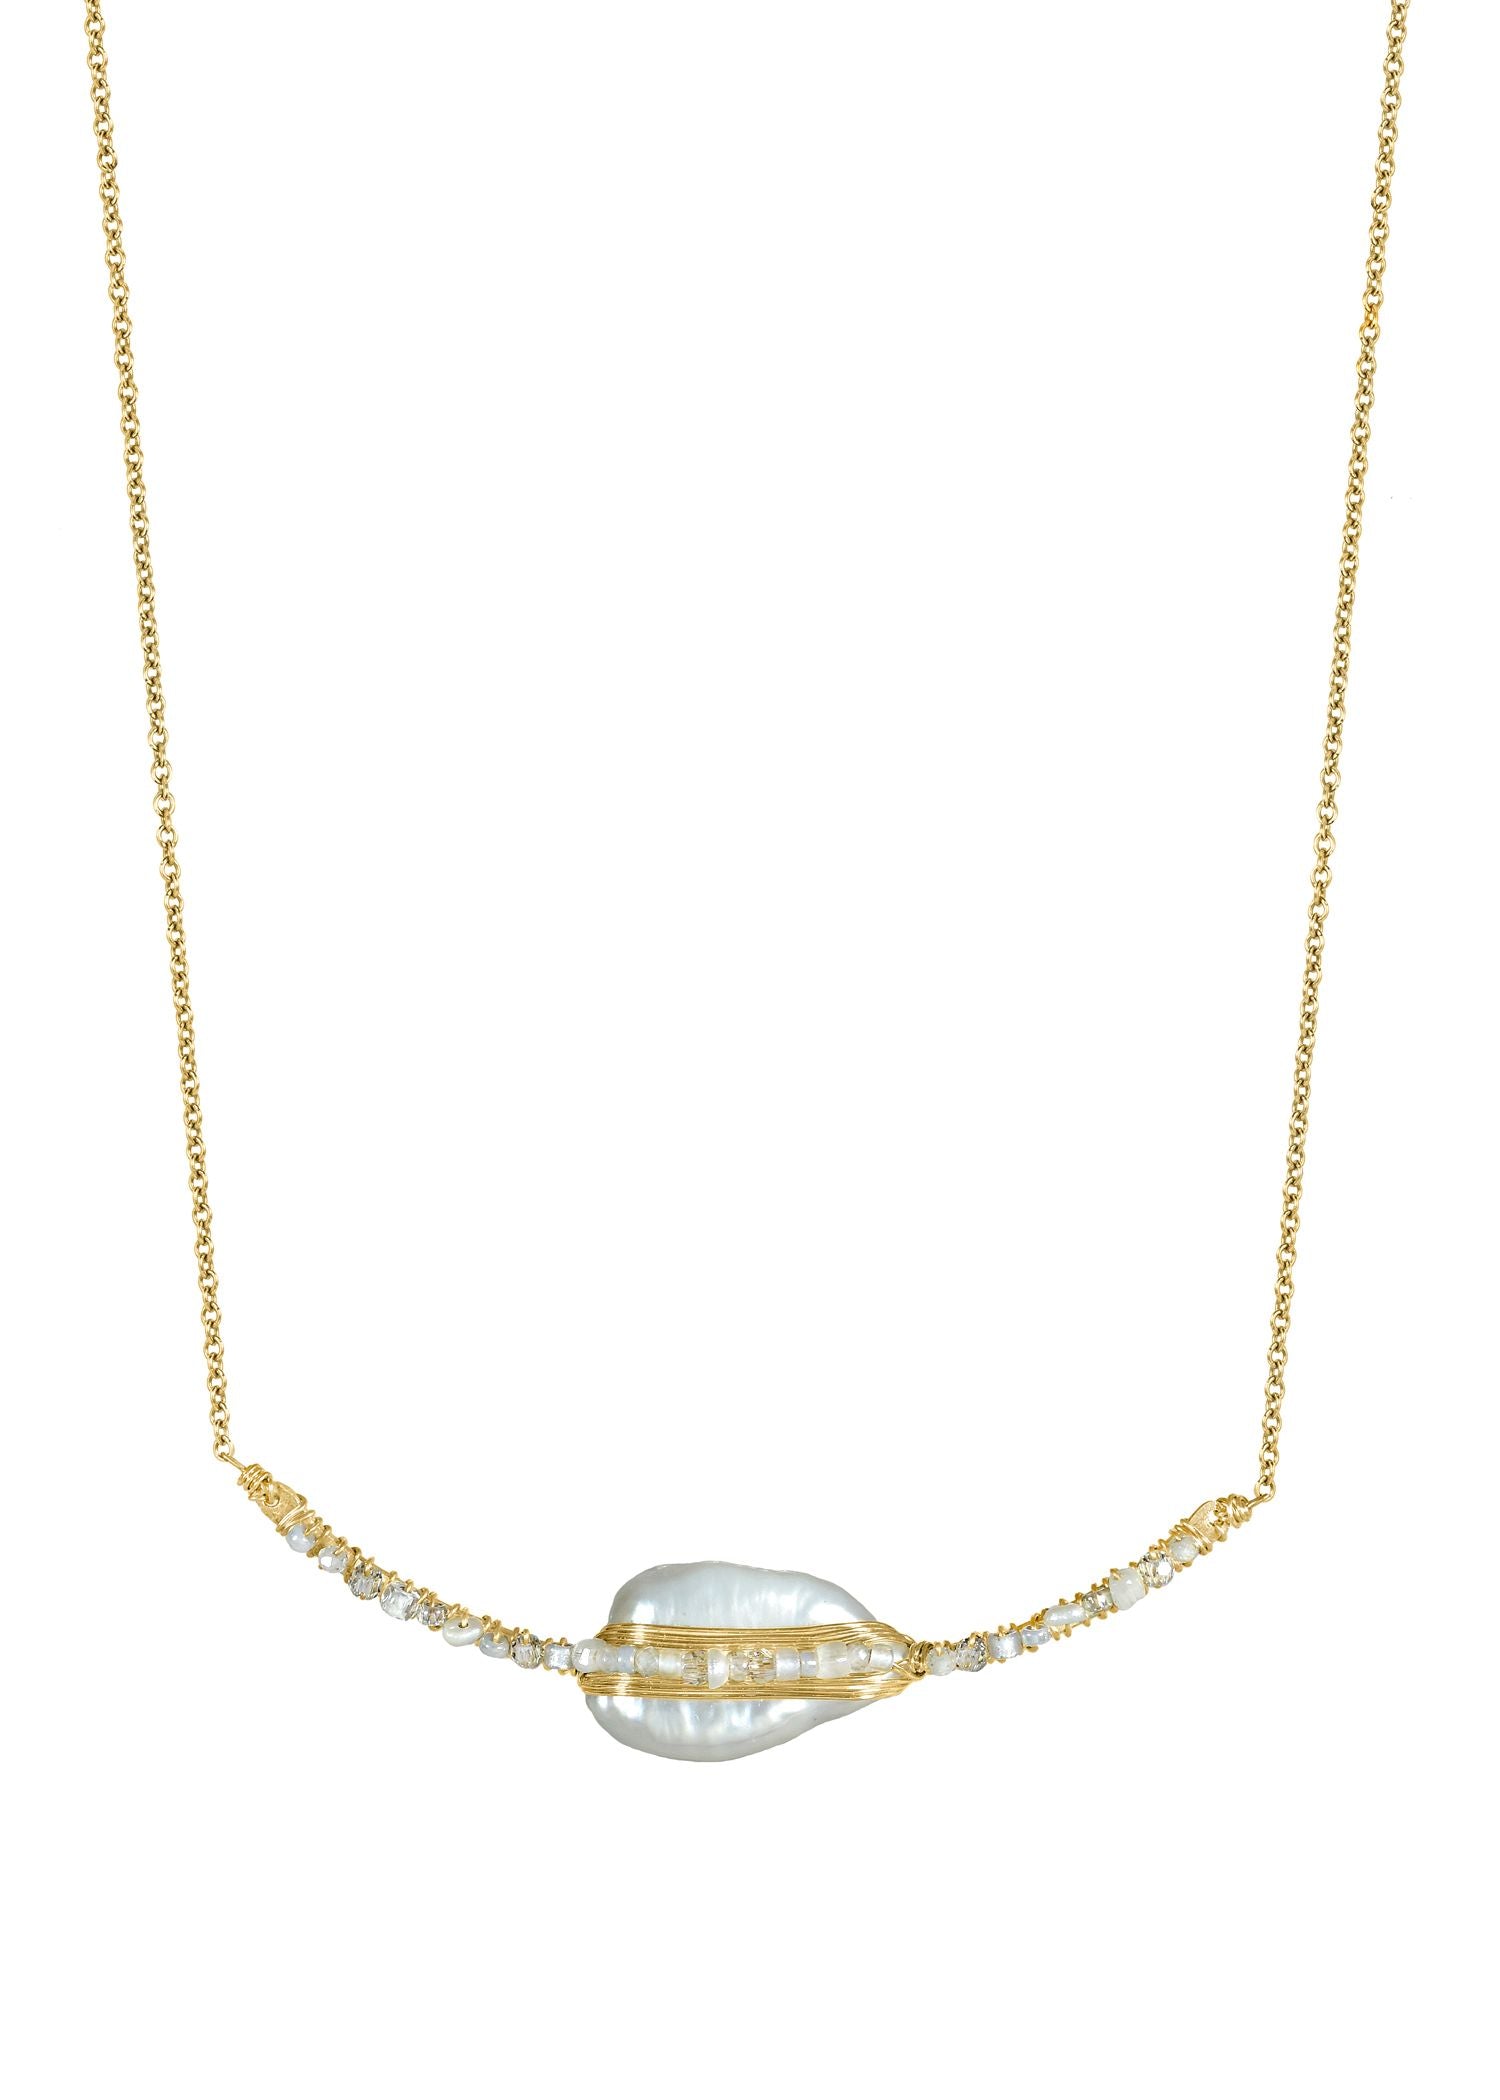 Fresh water pearls White moonstone Crystal Seed beads 14k gold fill Necklace measures 16-1/2" necklace Pendant measures 7/16" in length and 2-1/2" in width Handmade in our Los Angeles studio